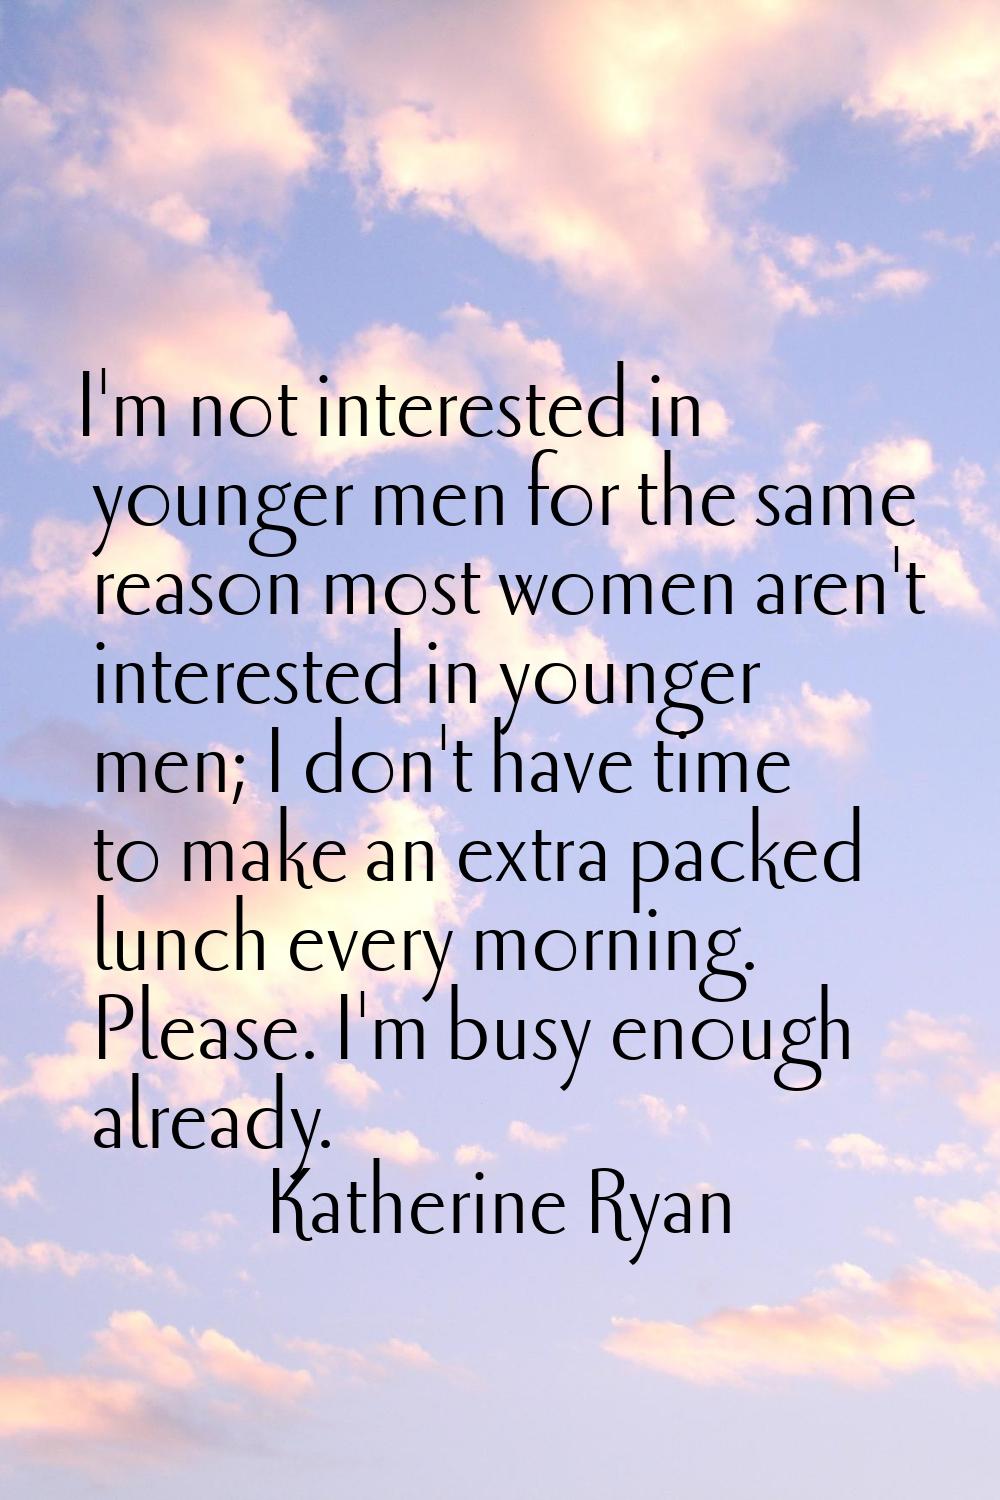 I'm not interested in younger men for the same reason most women aren't interested in younger men; 